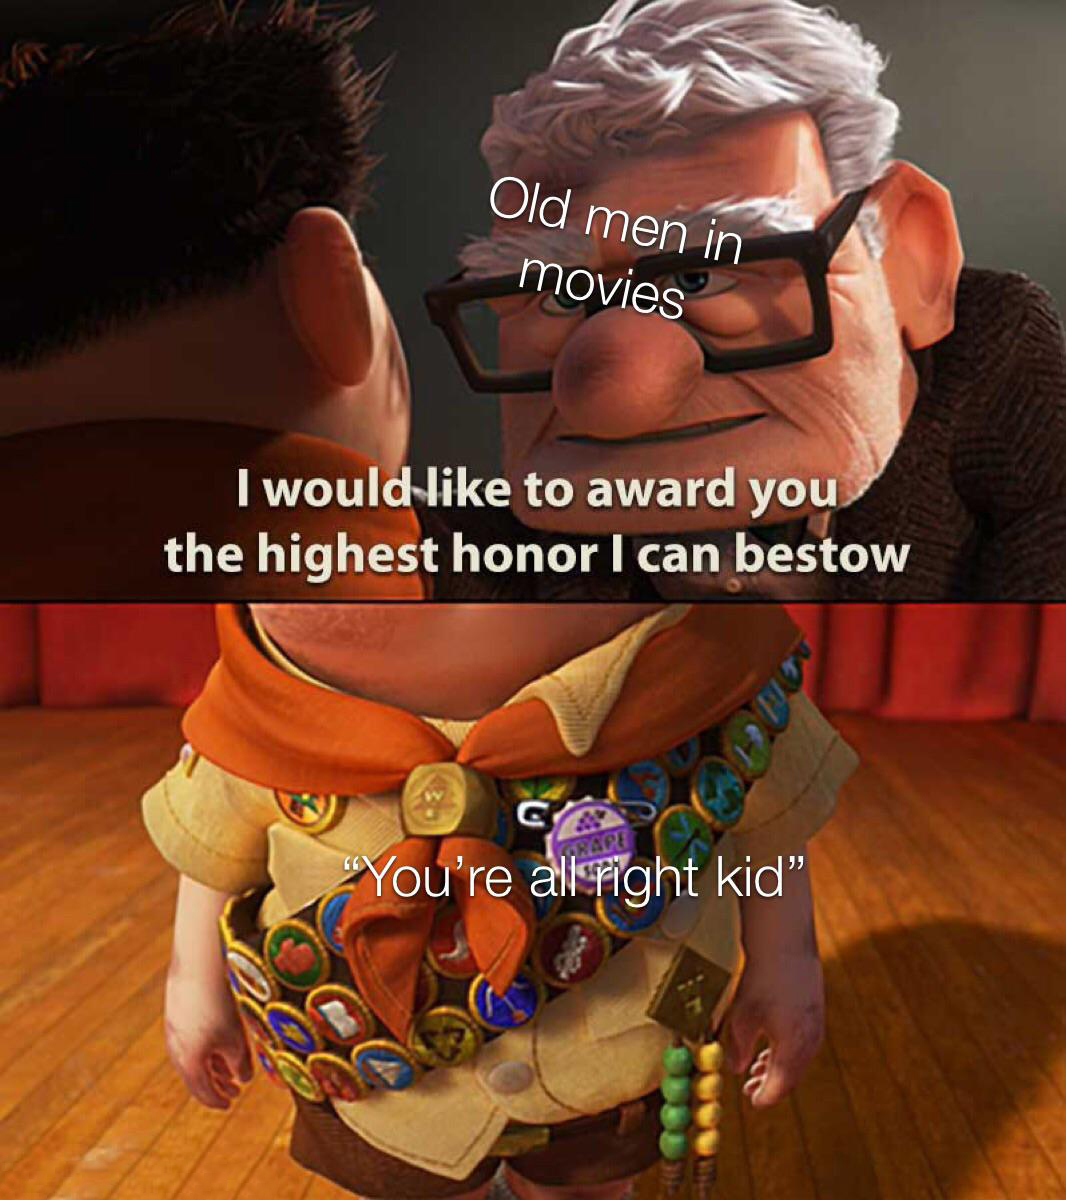 dank memes - funny memes - up ellie badge - Old men in movies I would to award you the highest honor I can bestow "You're all right kid"